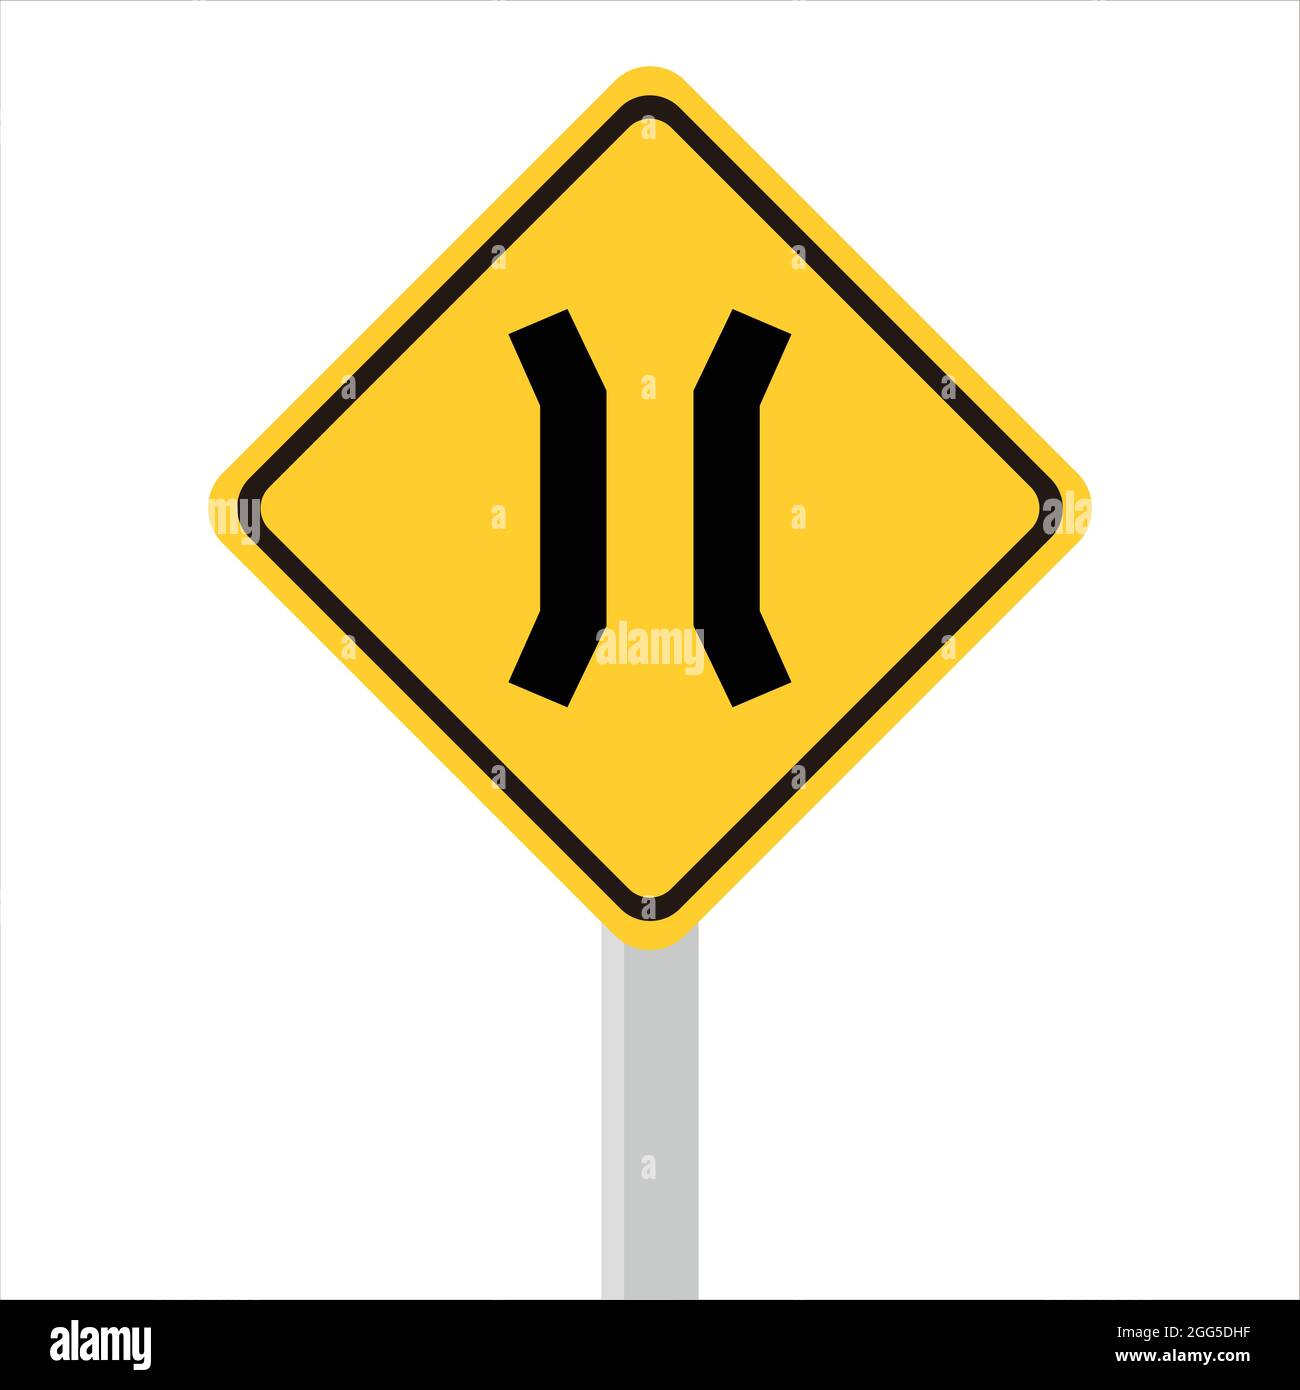 Bridge traffic sign. Traffic safety signs are orange. road narrowing traffic signs Stock Vector